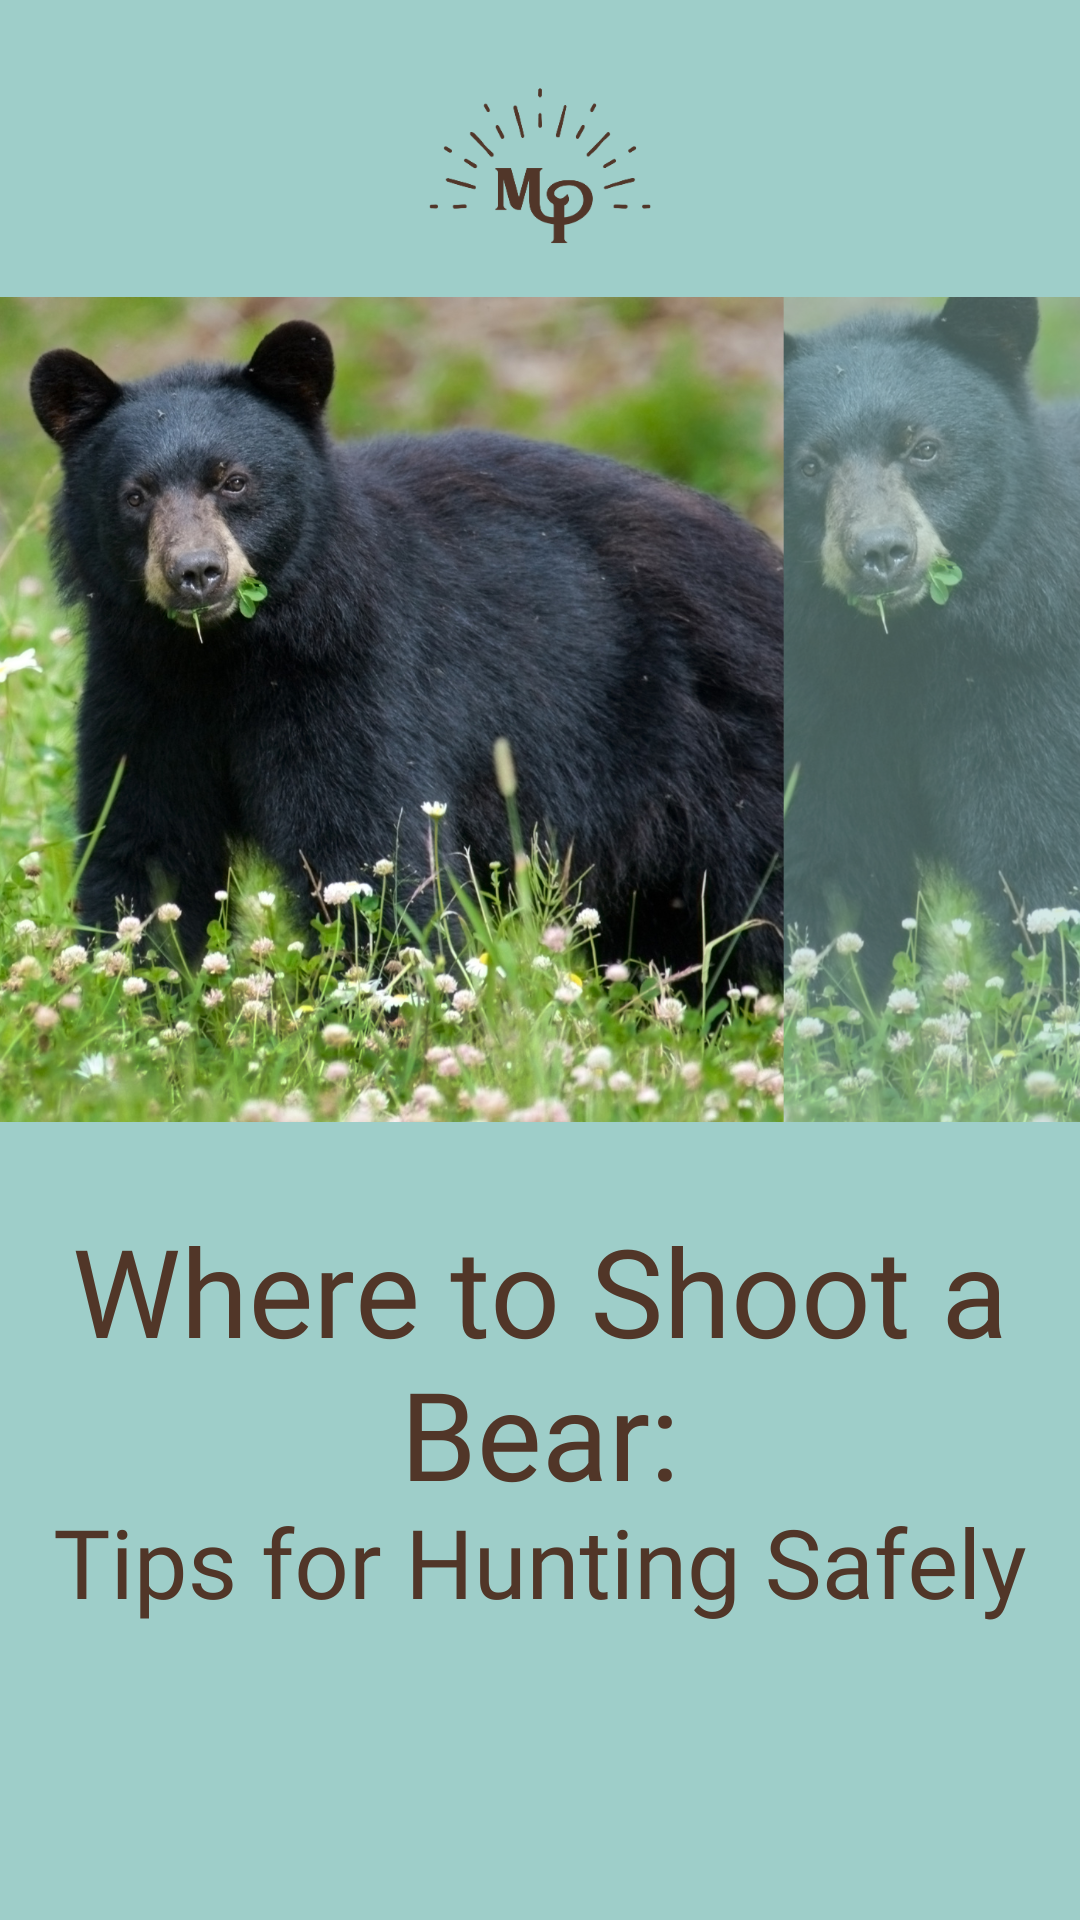 Where to Shoot a Bear: Tips for Hunting Safely